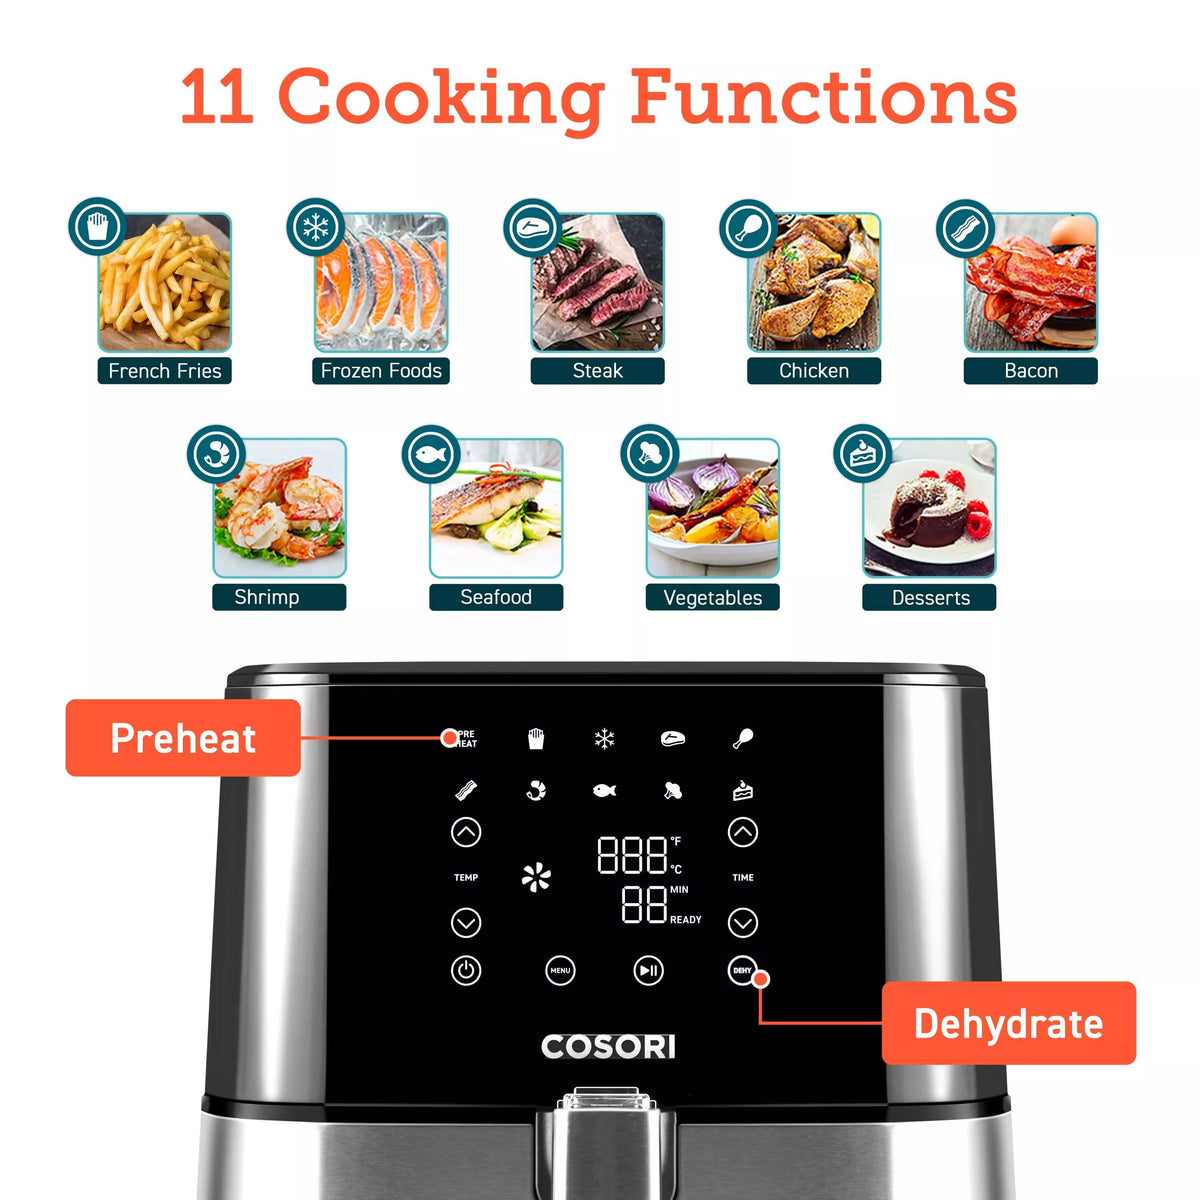 COLL 5.5Ltr Premium Air Fryer CP258 Stainless Steel with Dehydrate - - RIBI Malta 